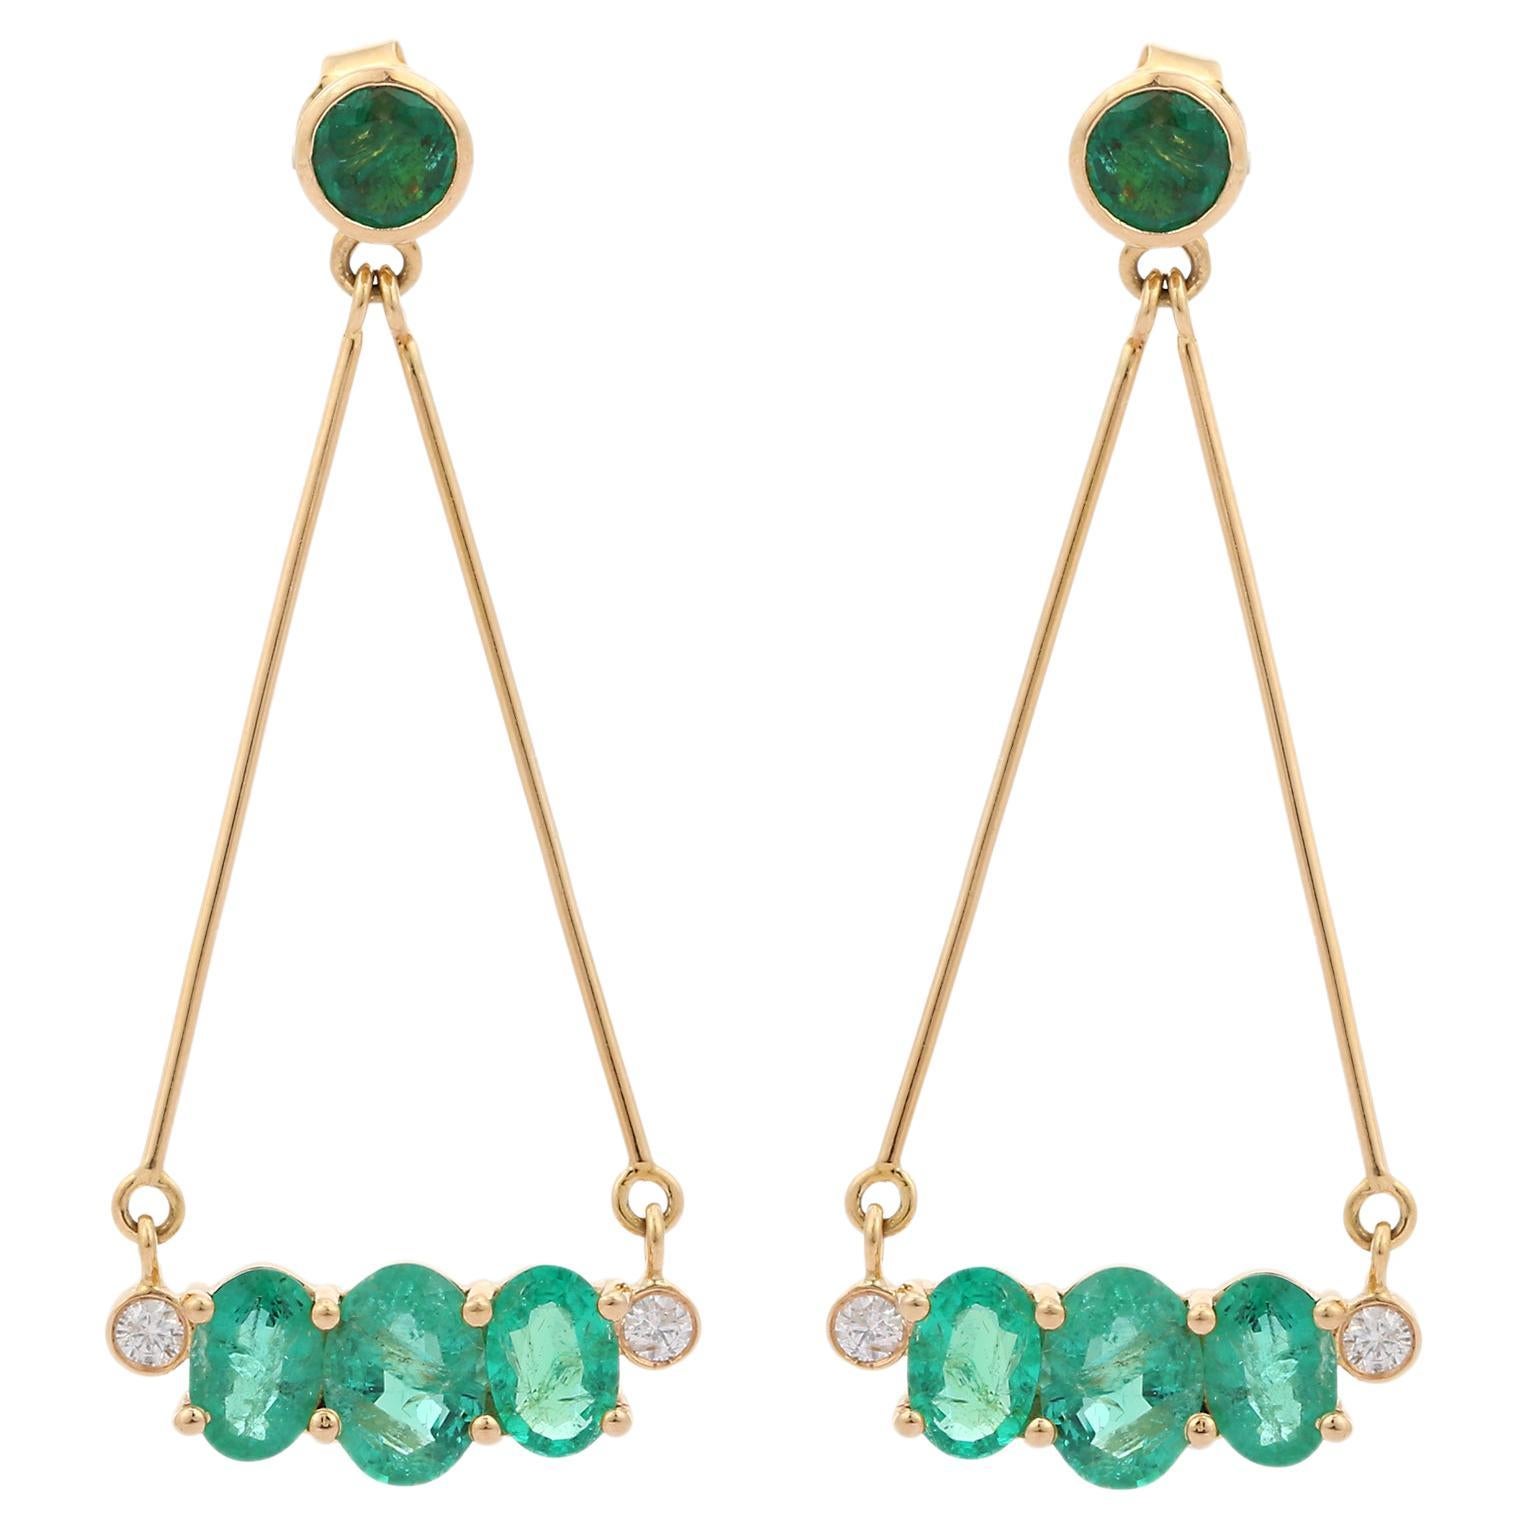 Stylish emerald Chain Dangle Earrings with Diamond in 18k Solid Yellow Gold